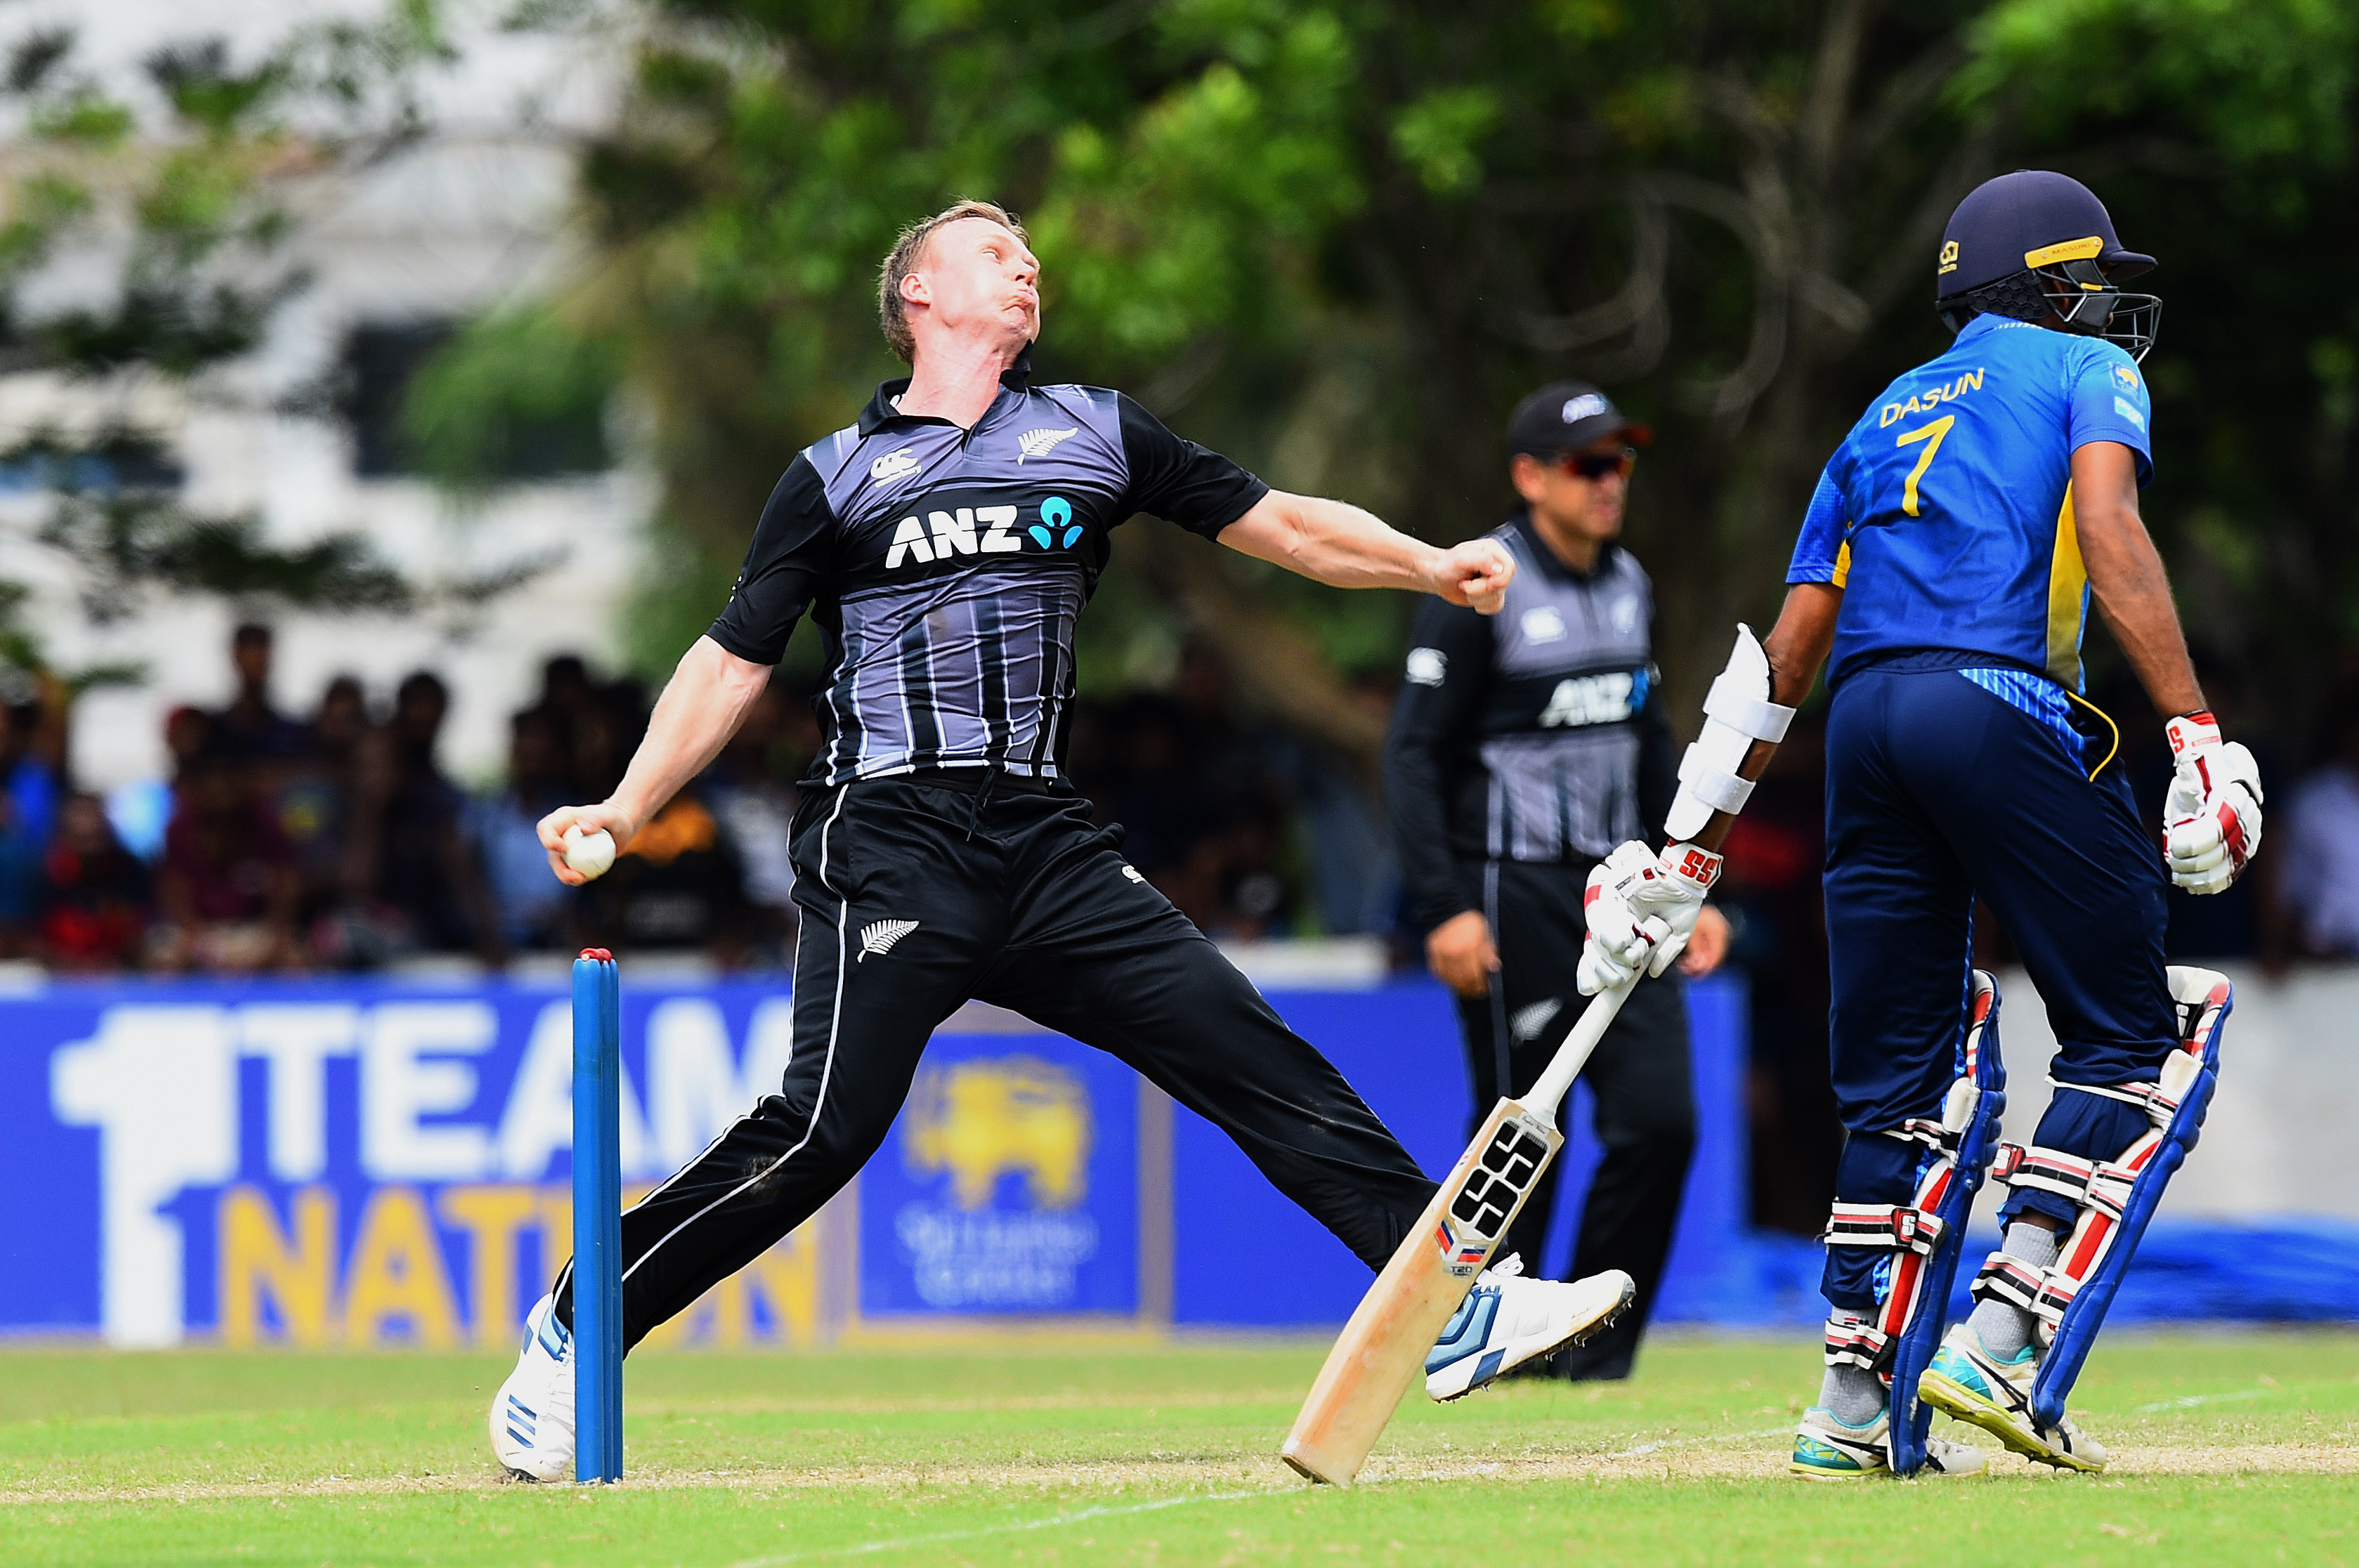 New Zealand defeat SL Board President’s XI by 33 runs in T20 warm up